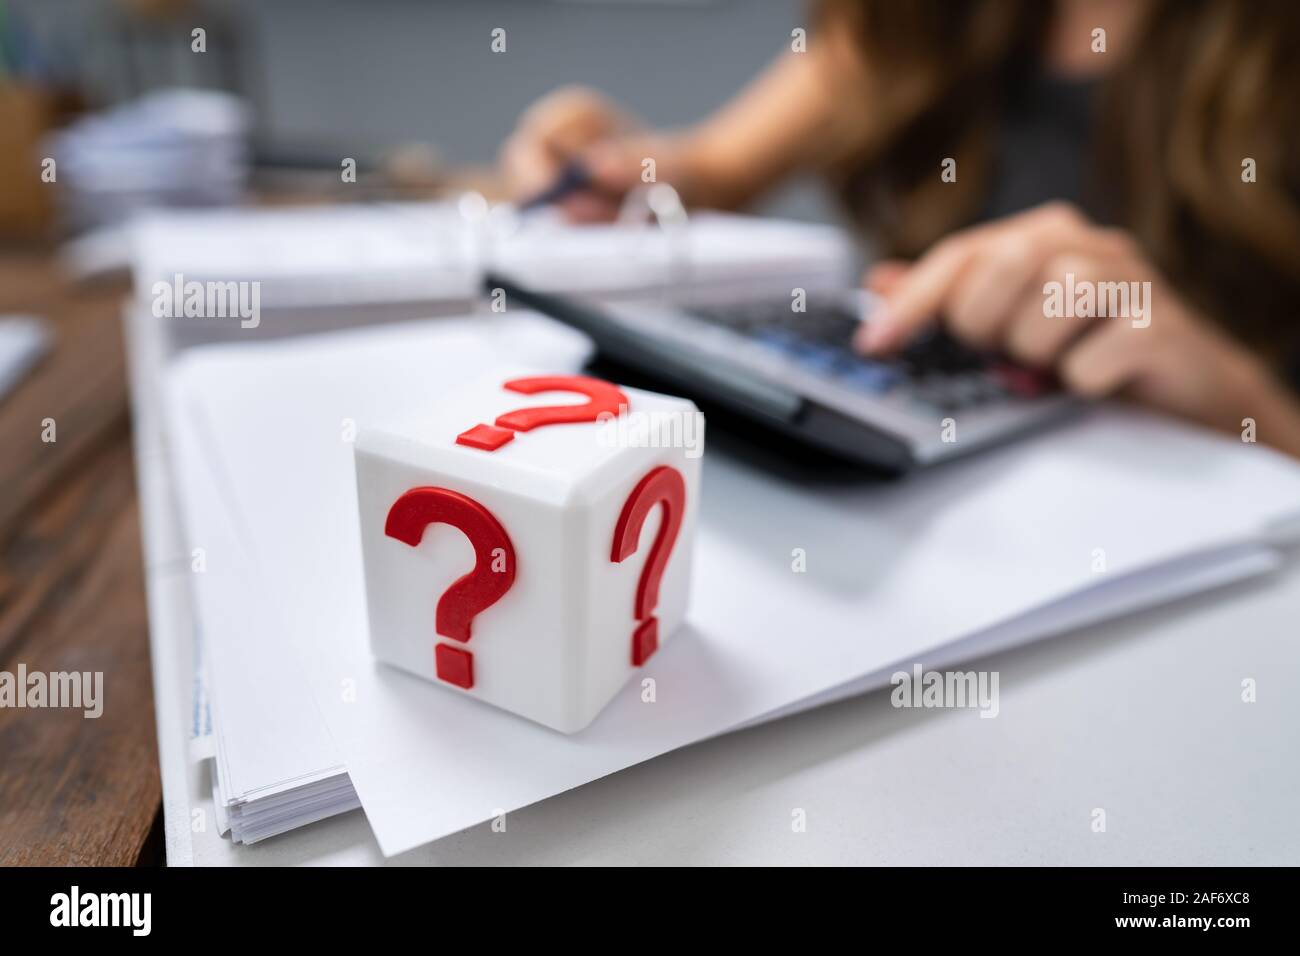 Cubic Block With Red Question Mark Sign On Desk Stock Photo